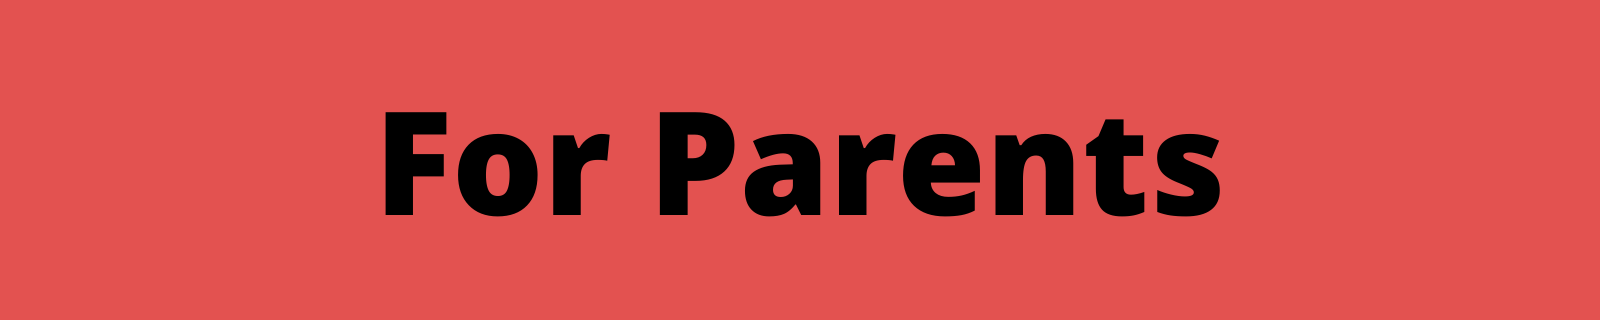 header that reads "for parents"